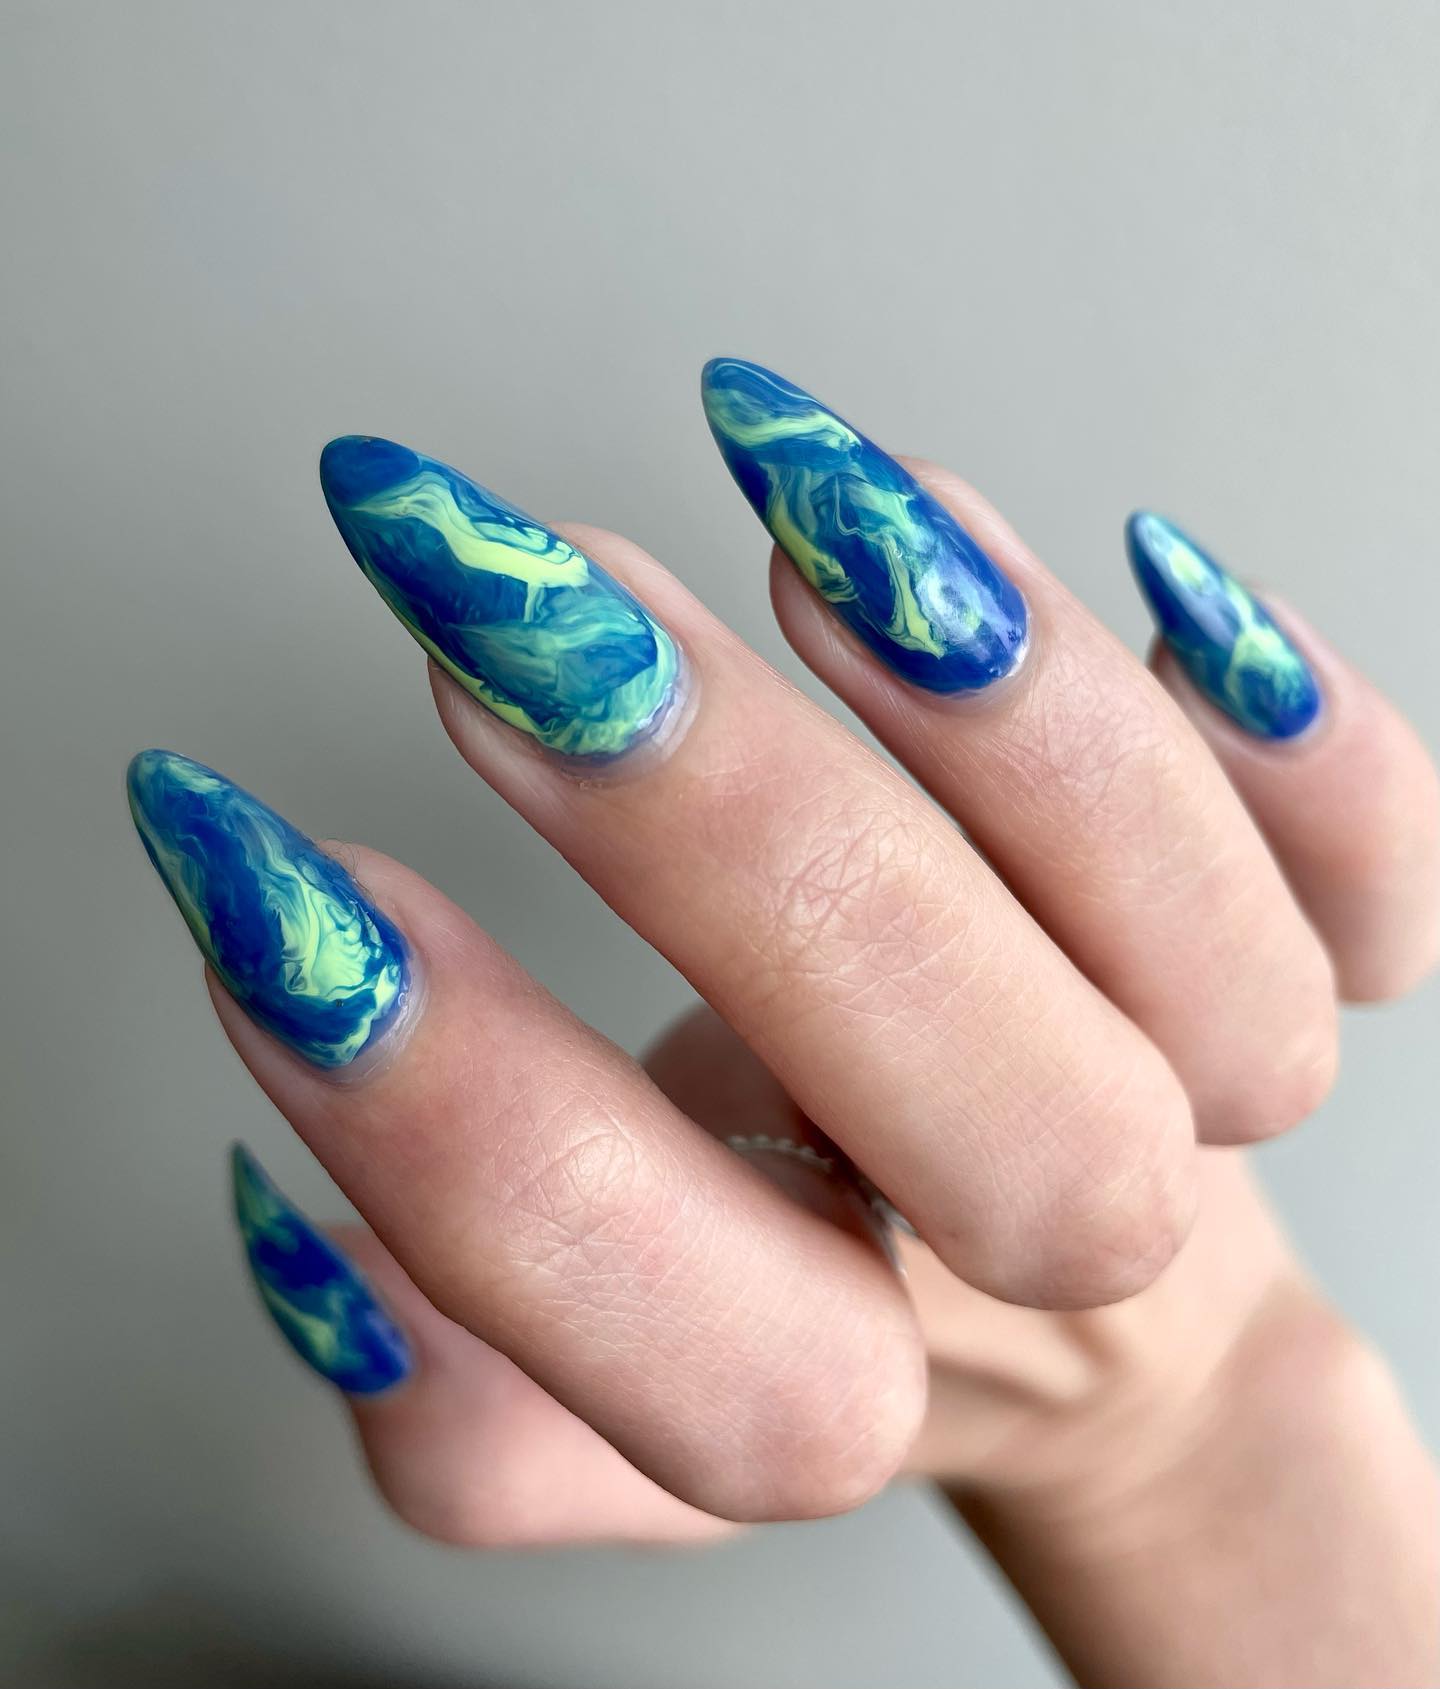 Marble Nail Designs Are Trending, Here's How To Get The Look - L'Oréal Paris